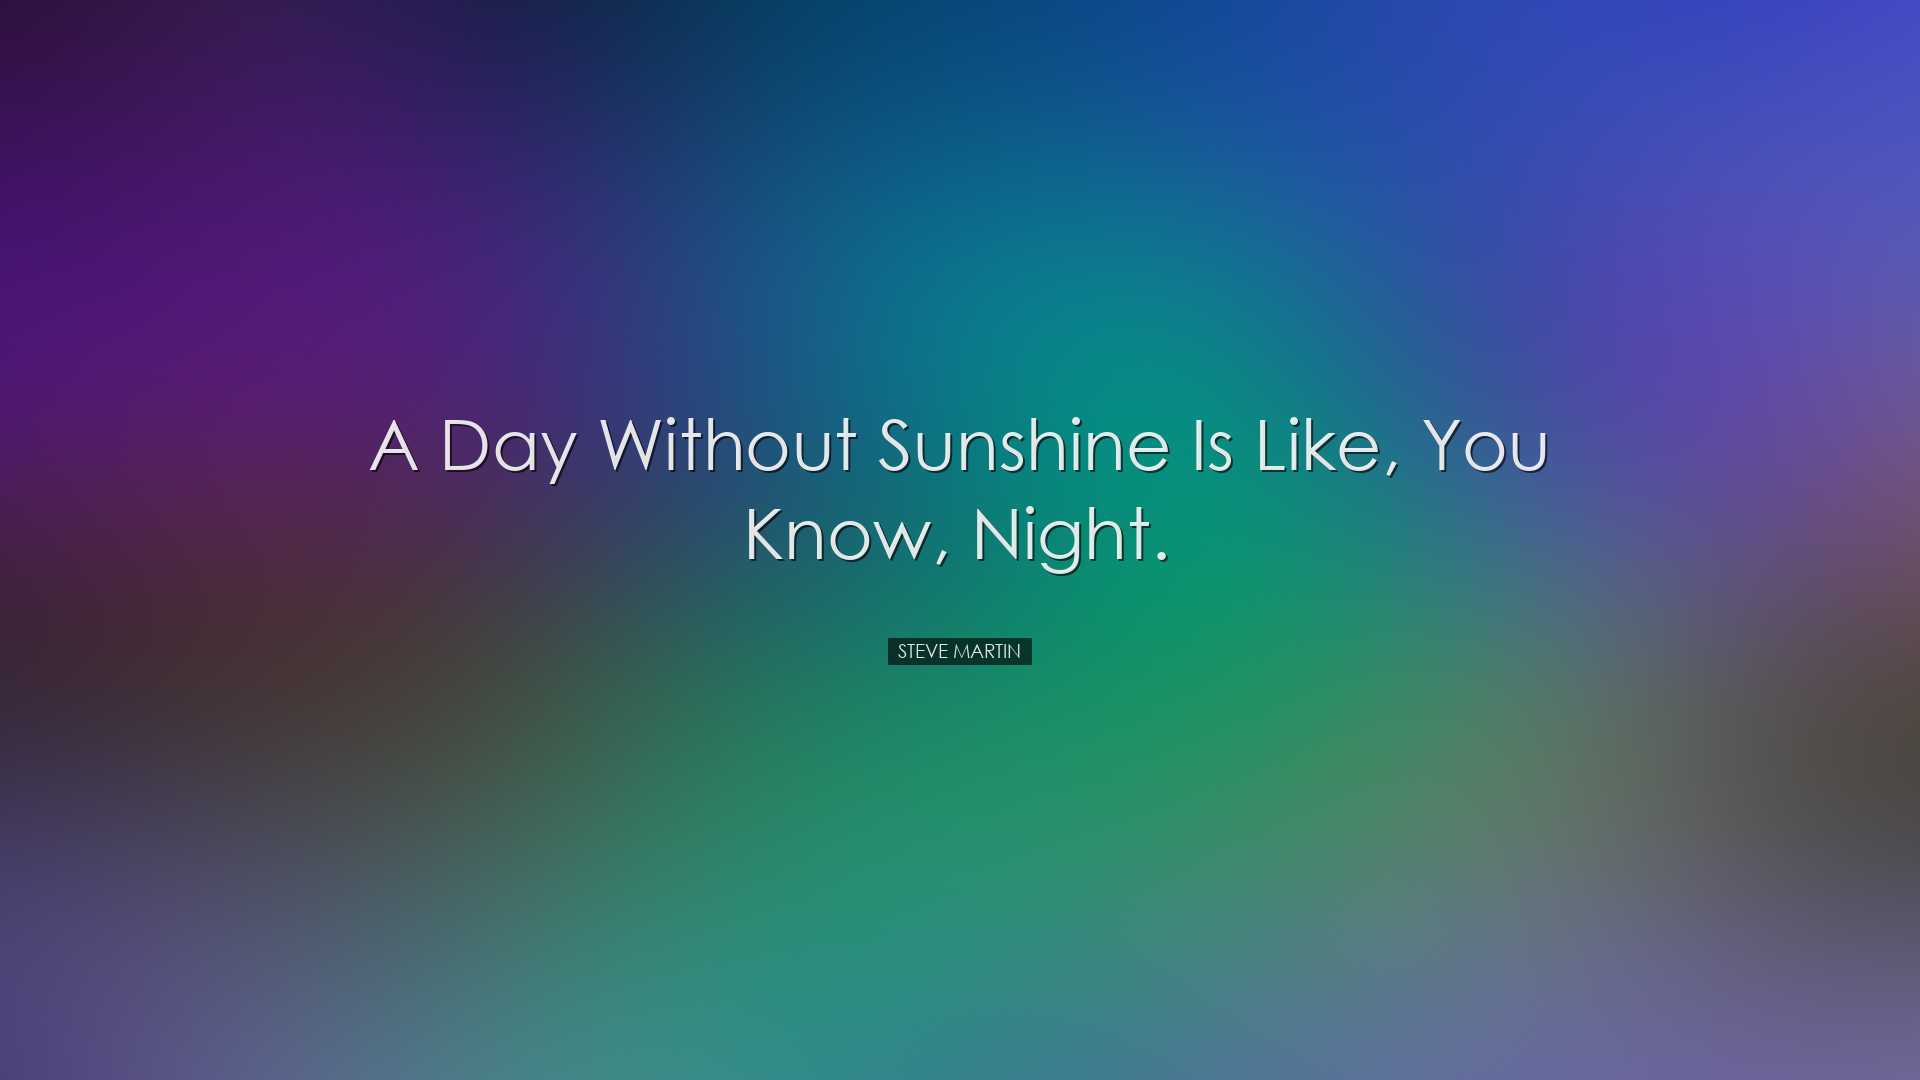 A day without sunshine is like, you know, night. - Steve Martin